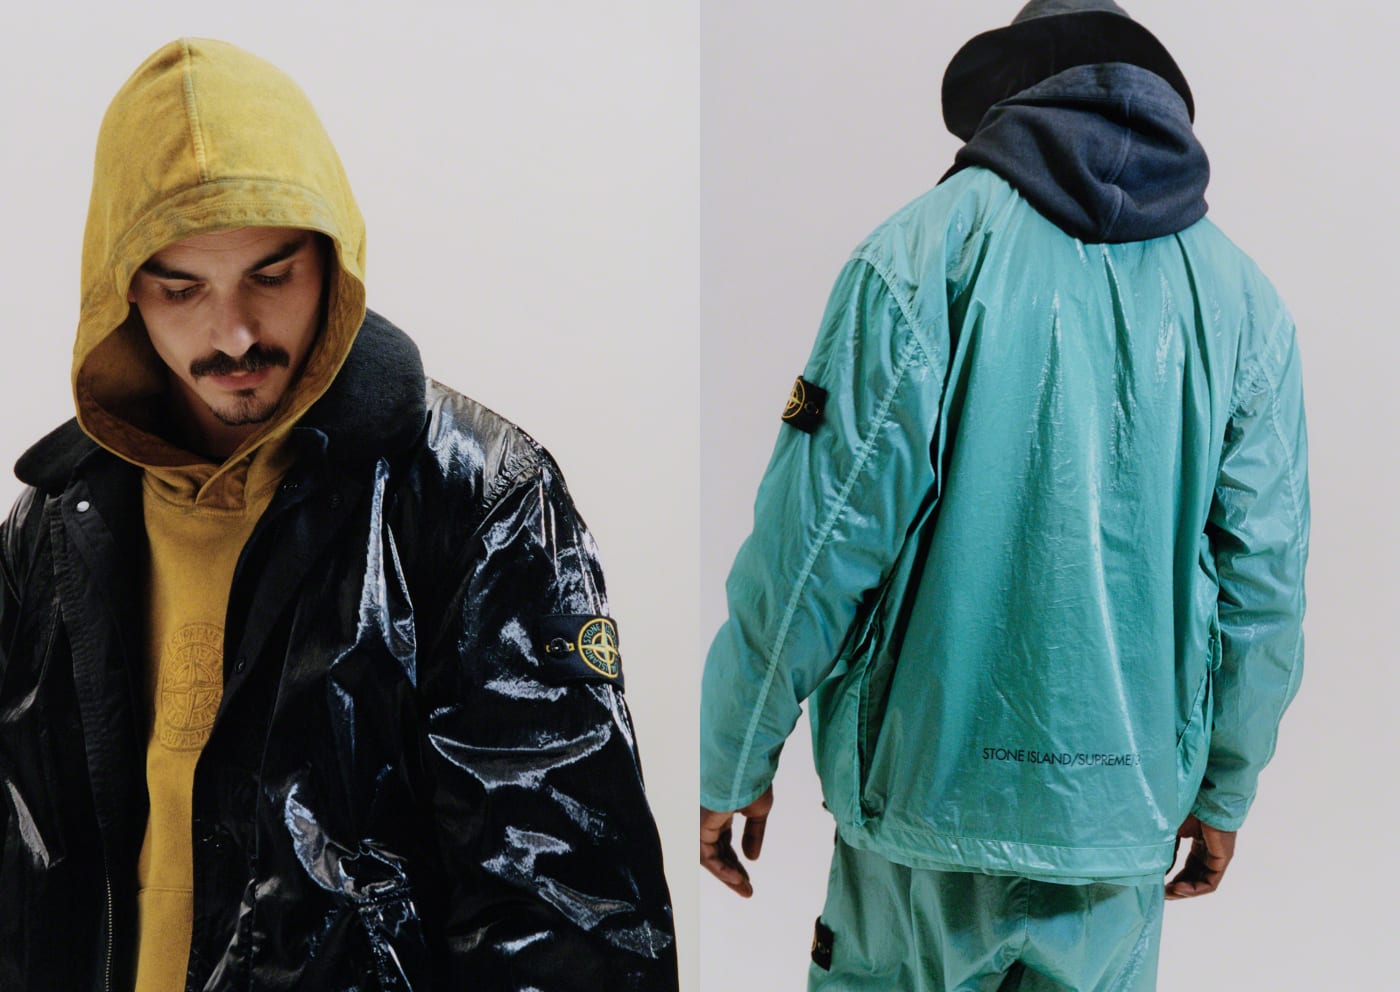 Stone Island and Supreme Are Set to Launch Arguably Their Best